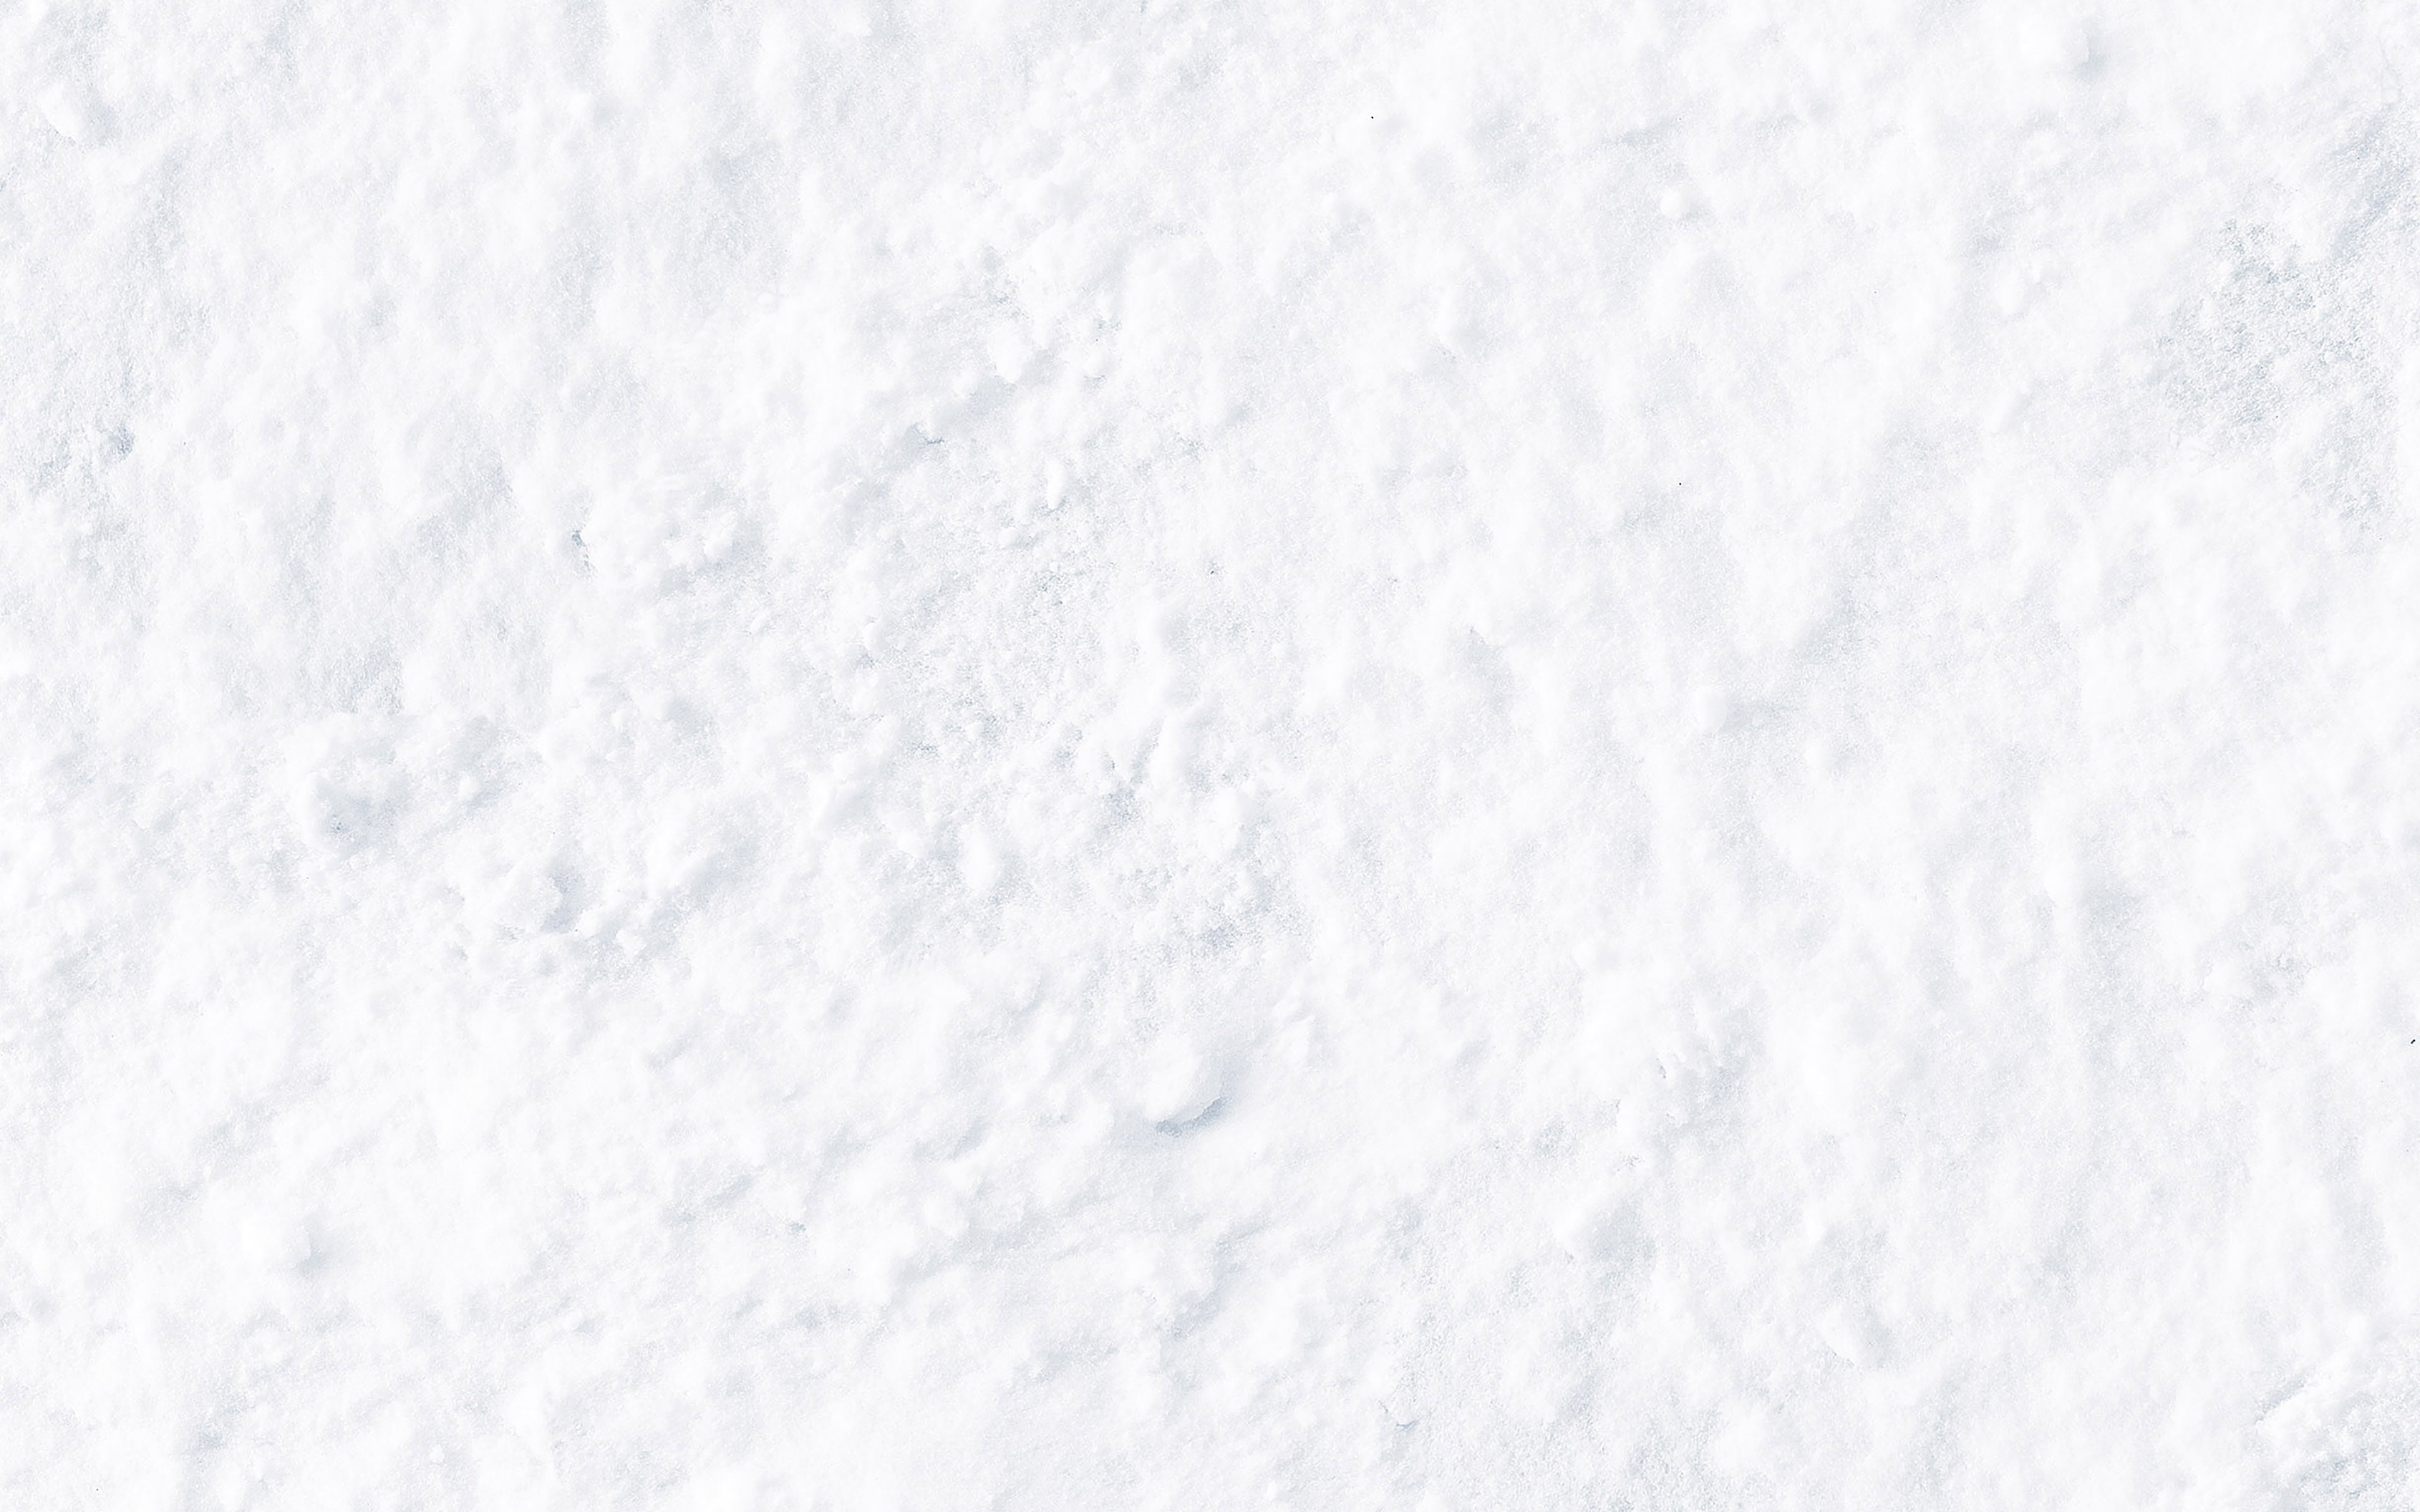 pure, snow, winter, pattern, backgrounds, white color, full frame